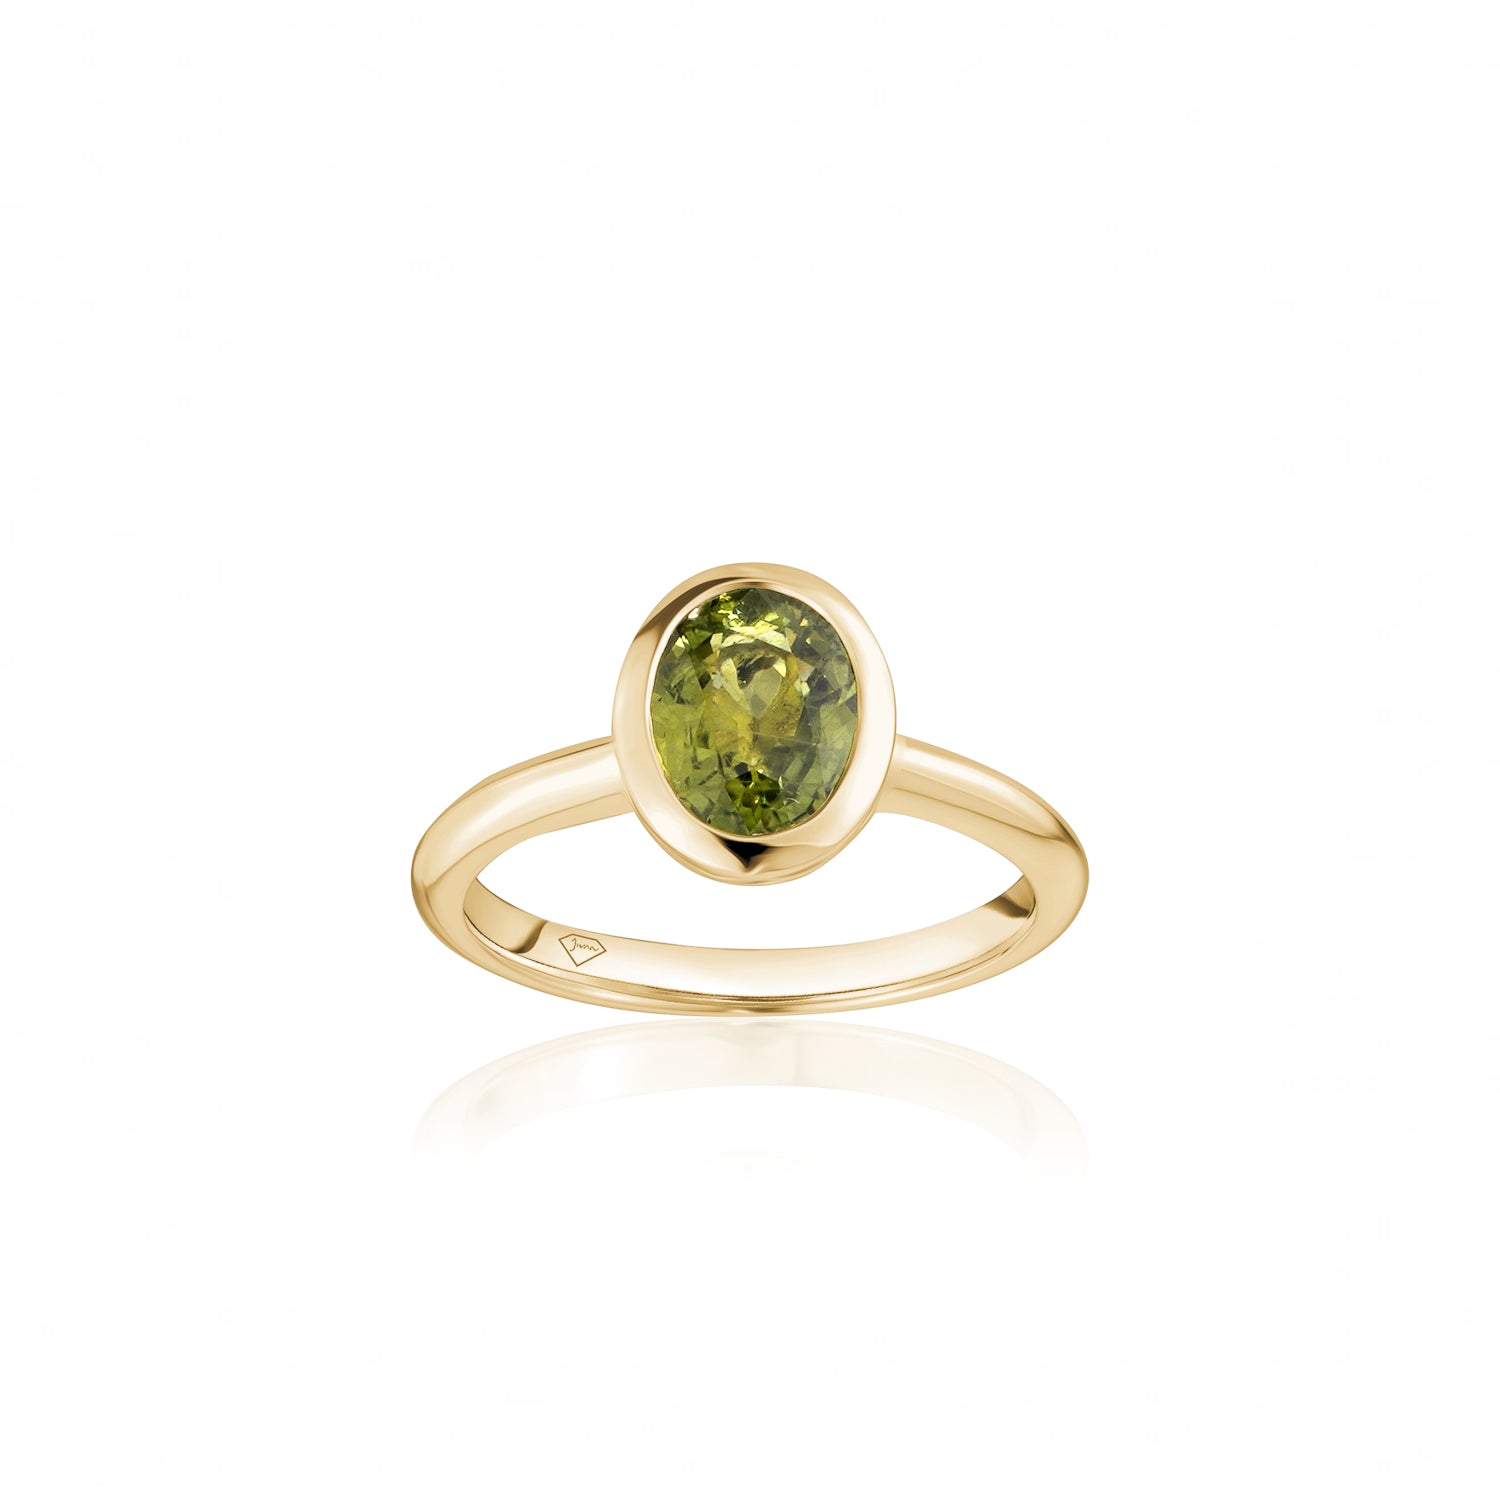 Mermaid Oval-Shaped Green Sapphire Bezel Ring in Yellow Gold